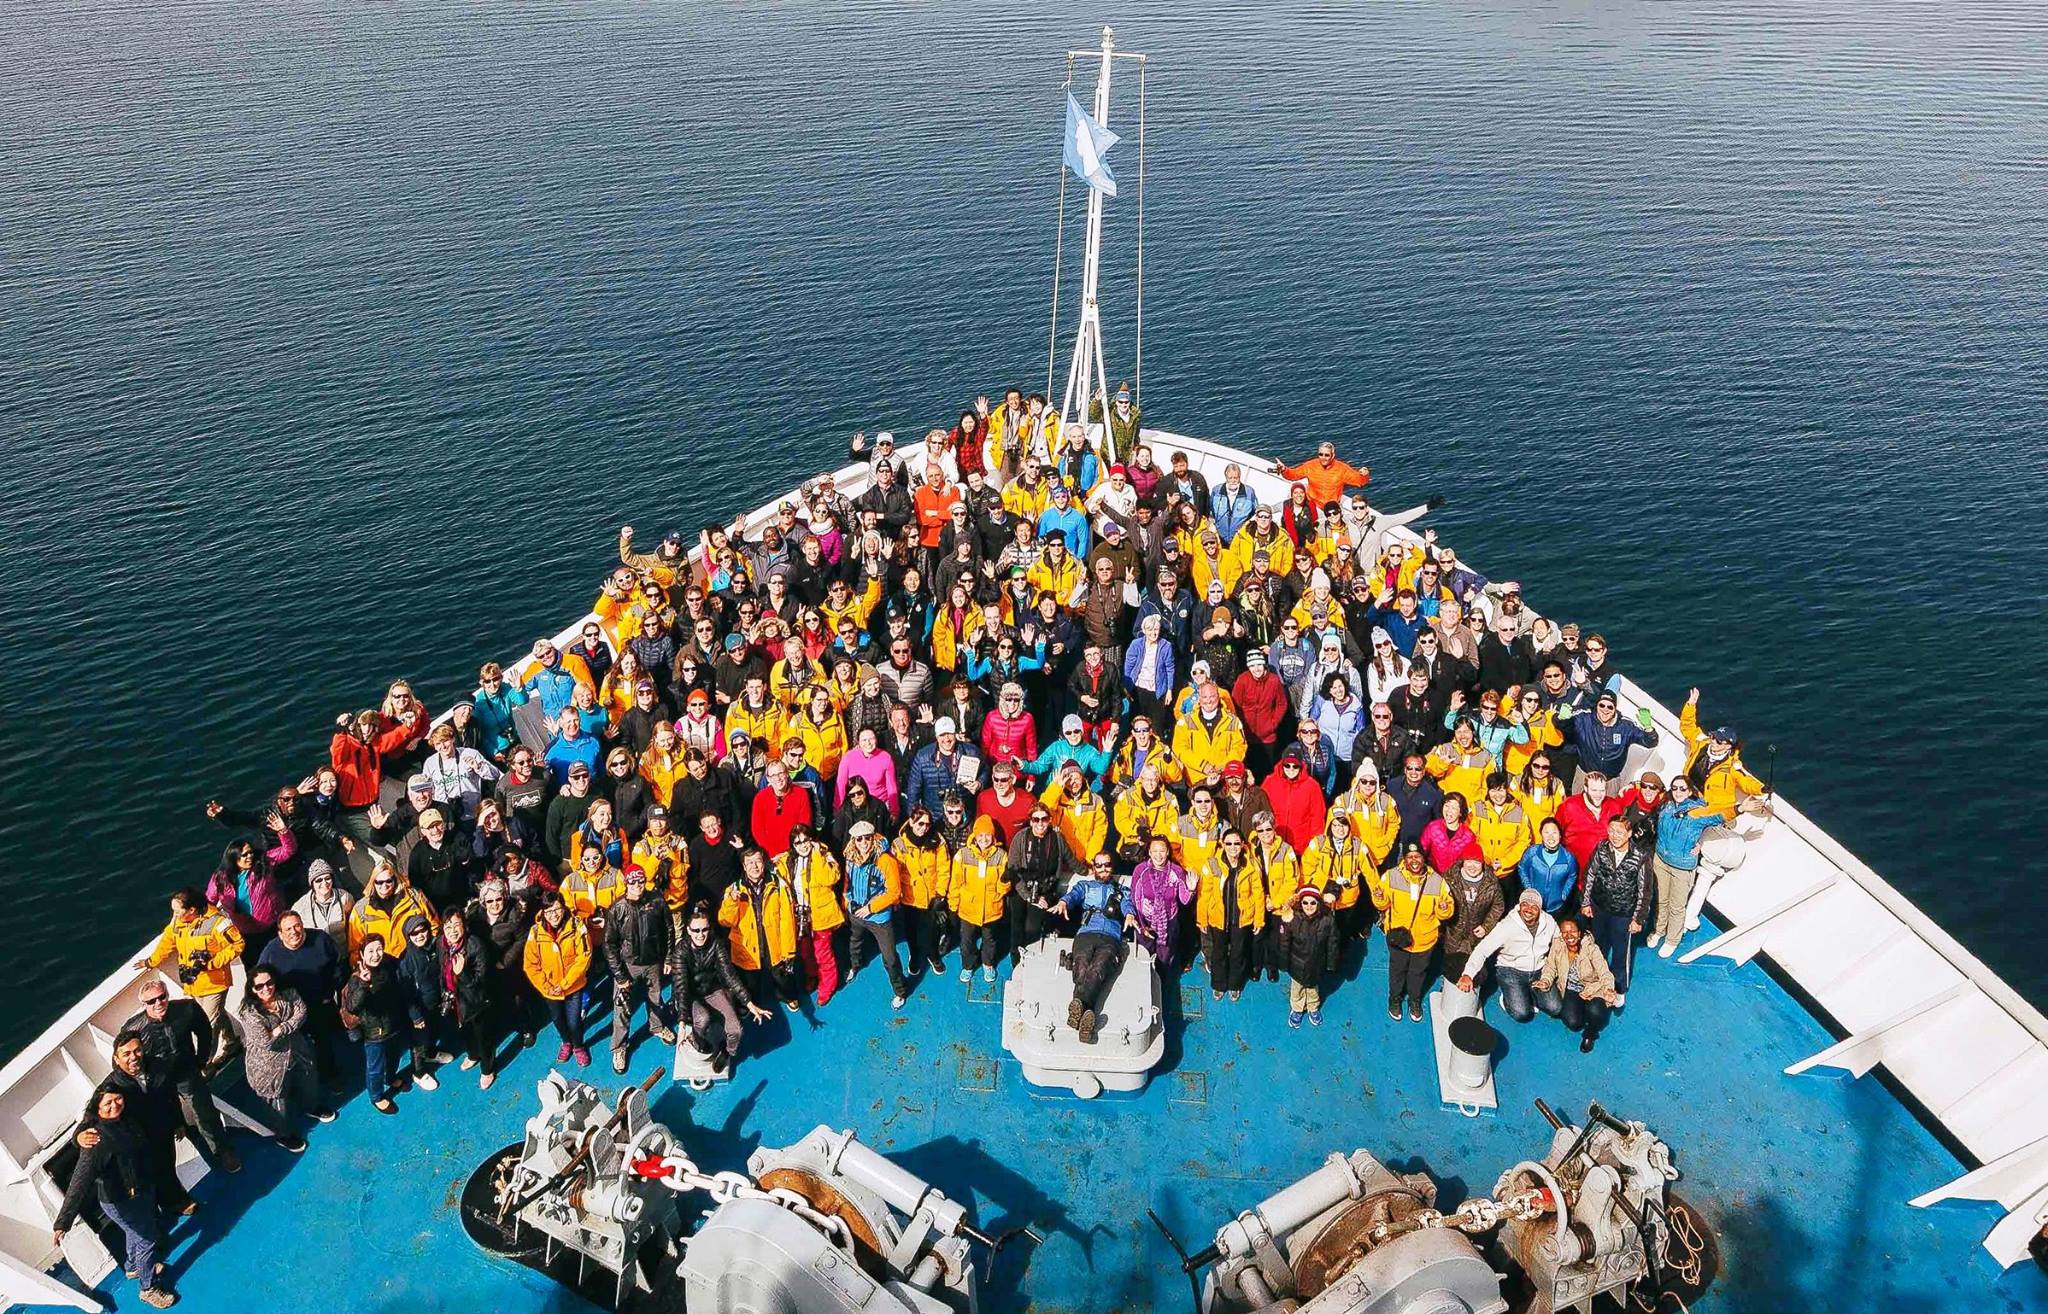 Passengers, crew and expedition team get together for a celebratory group shot on the bow of Ocean Endeavour at the end of their holiday season expedition to Antarctica.